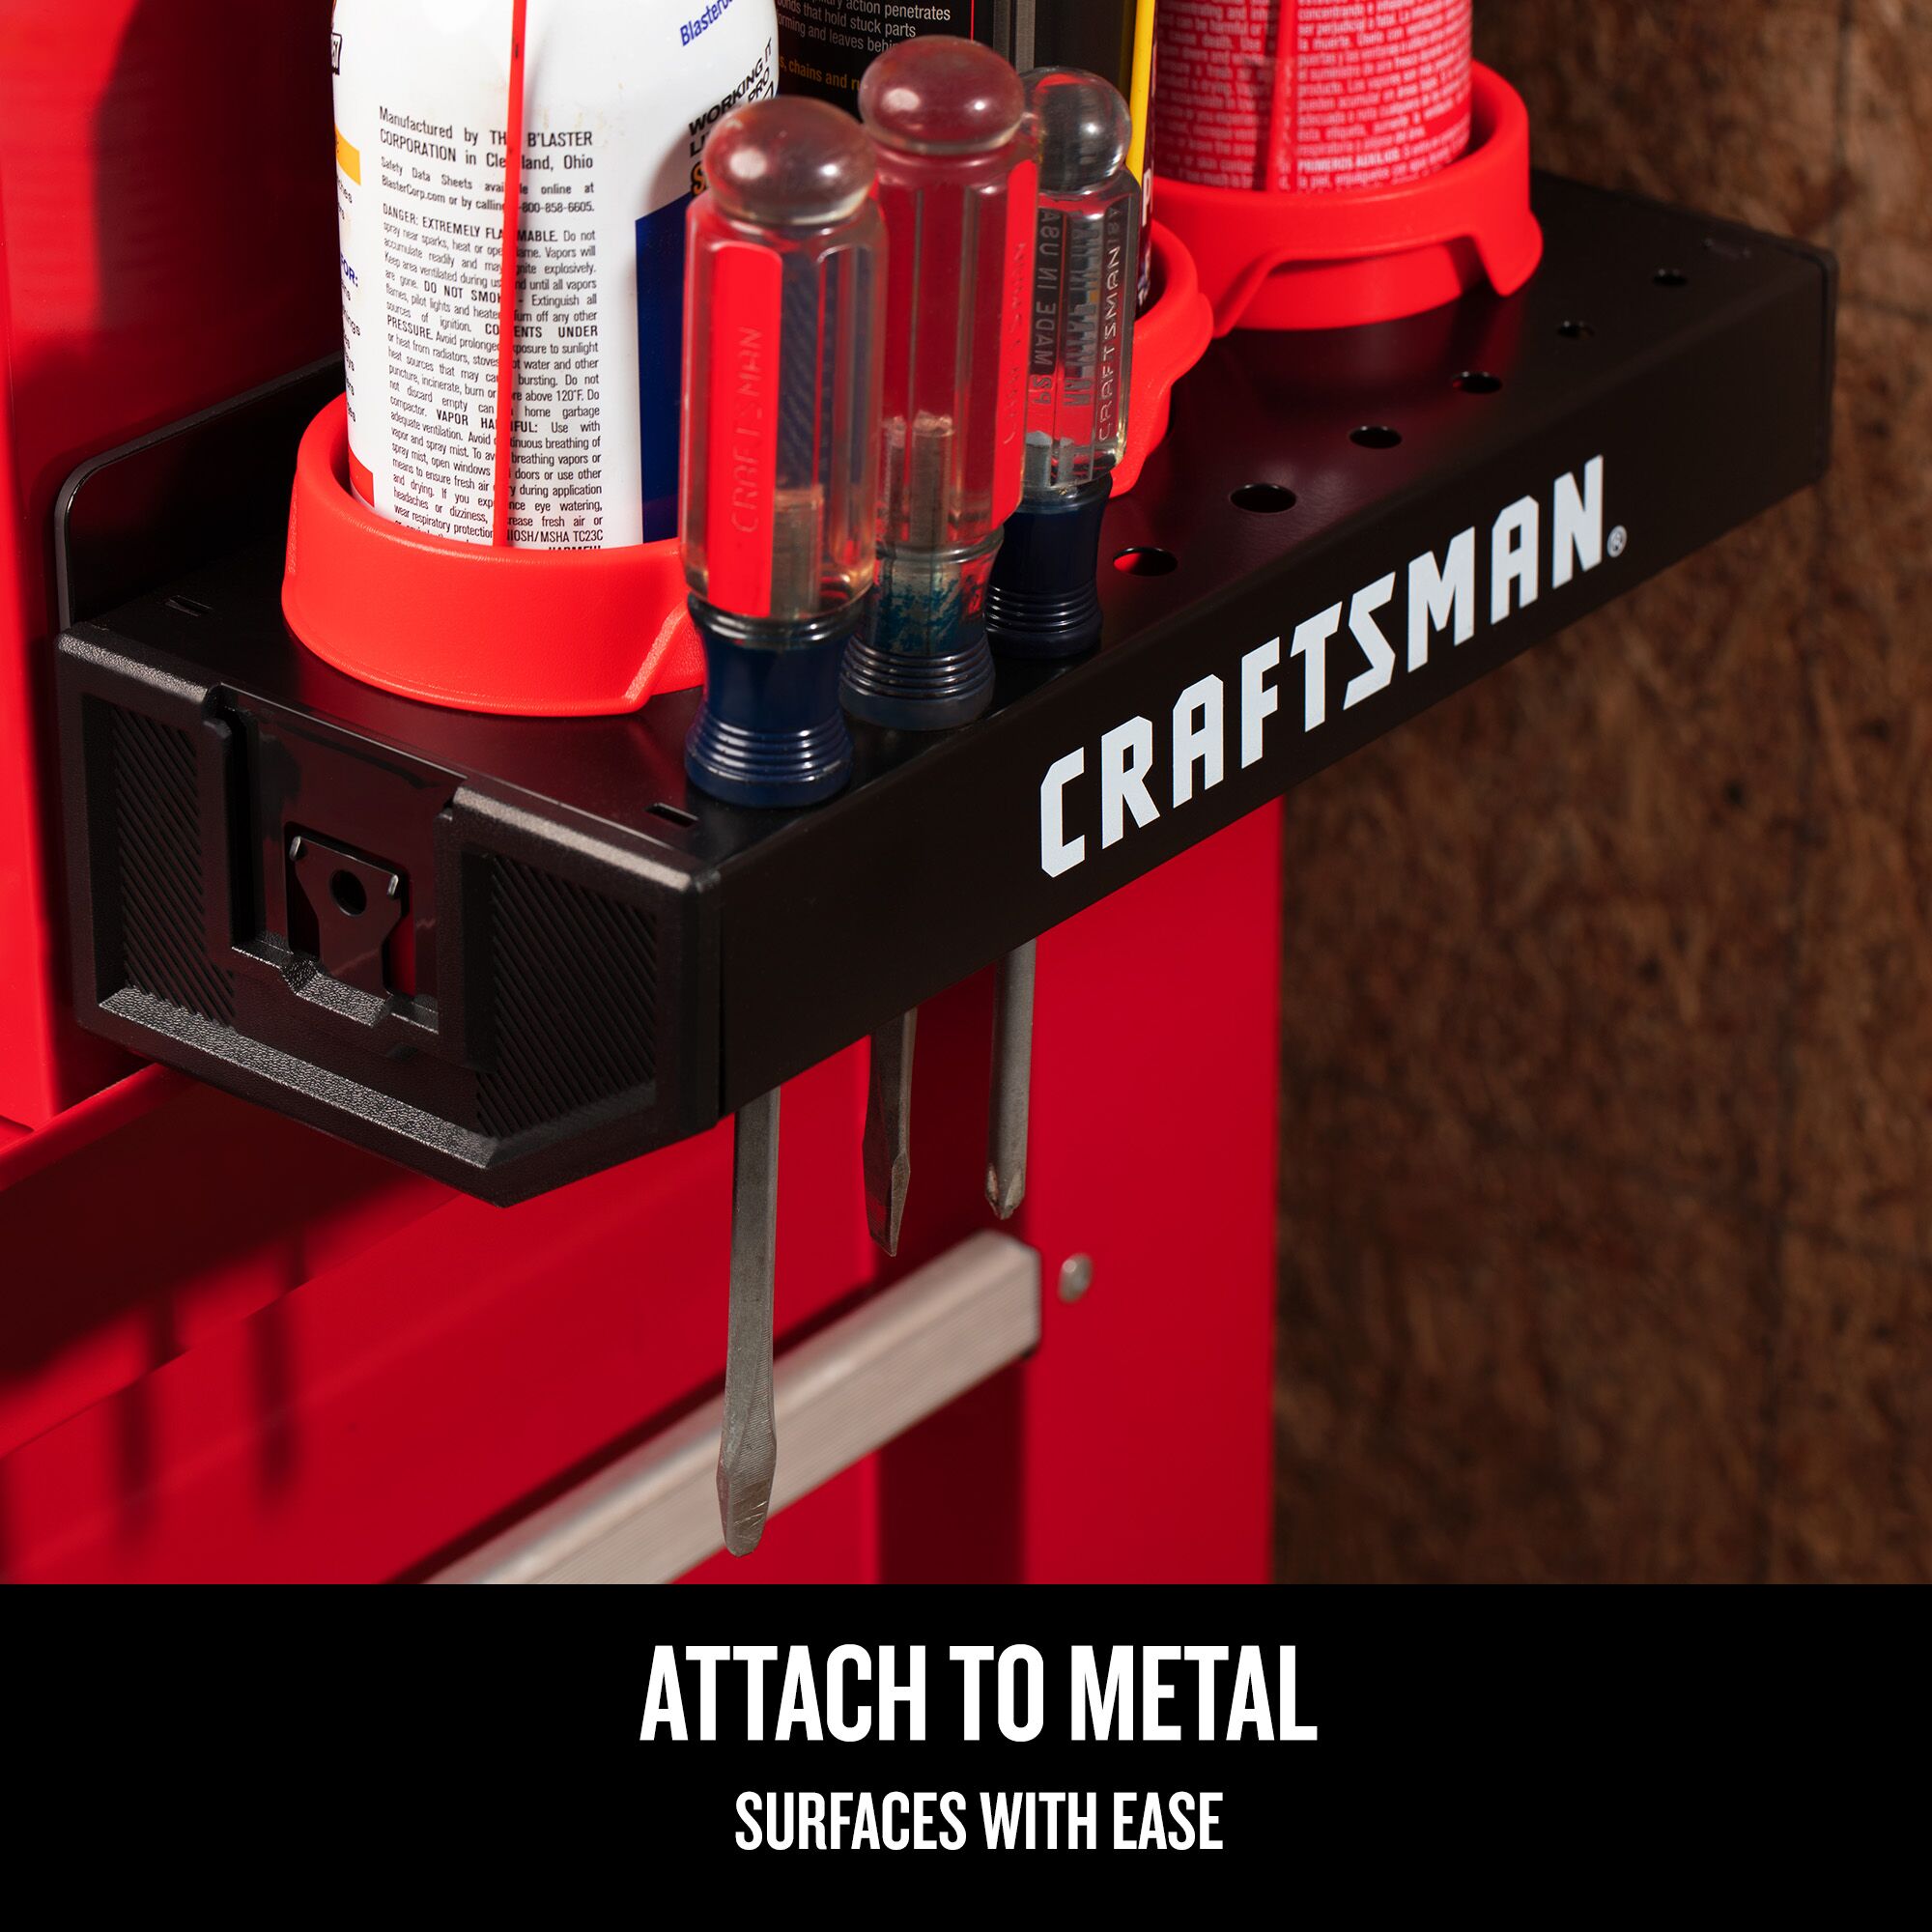 Graphic of CRAFTSMAN Accessories: Metal Storage highlighting product features